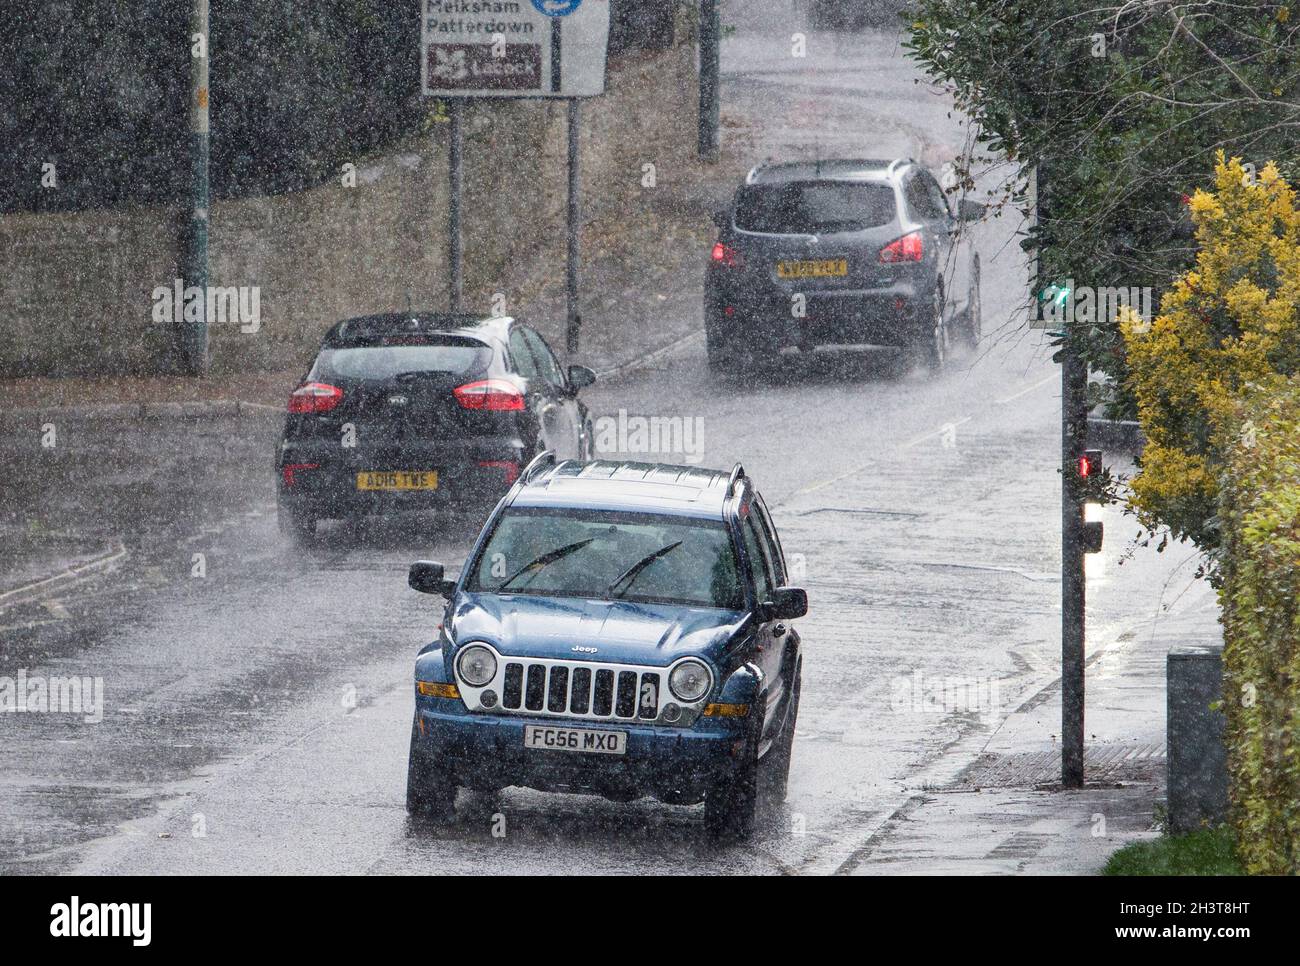 Chippenham, Wiltshire, UK. 30th October, 2021. Drivers are pictured braving heavy rain in Chippenham as heavy rain showers make their way across the UK. Credit: Lynchpics/Alamy Live News Stock Photo